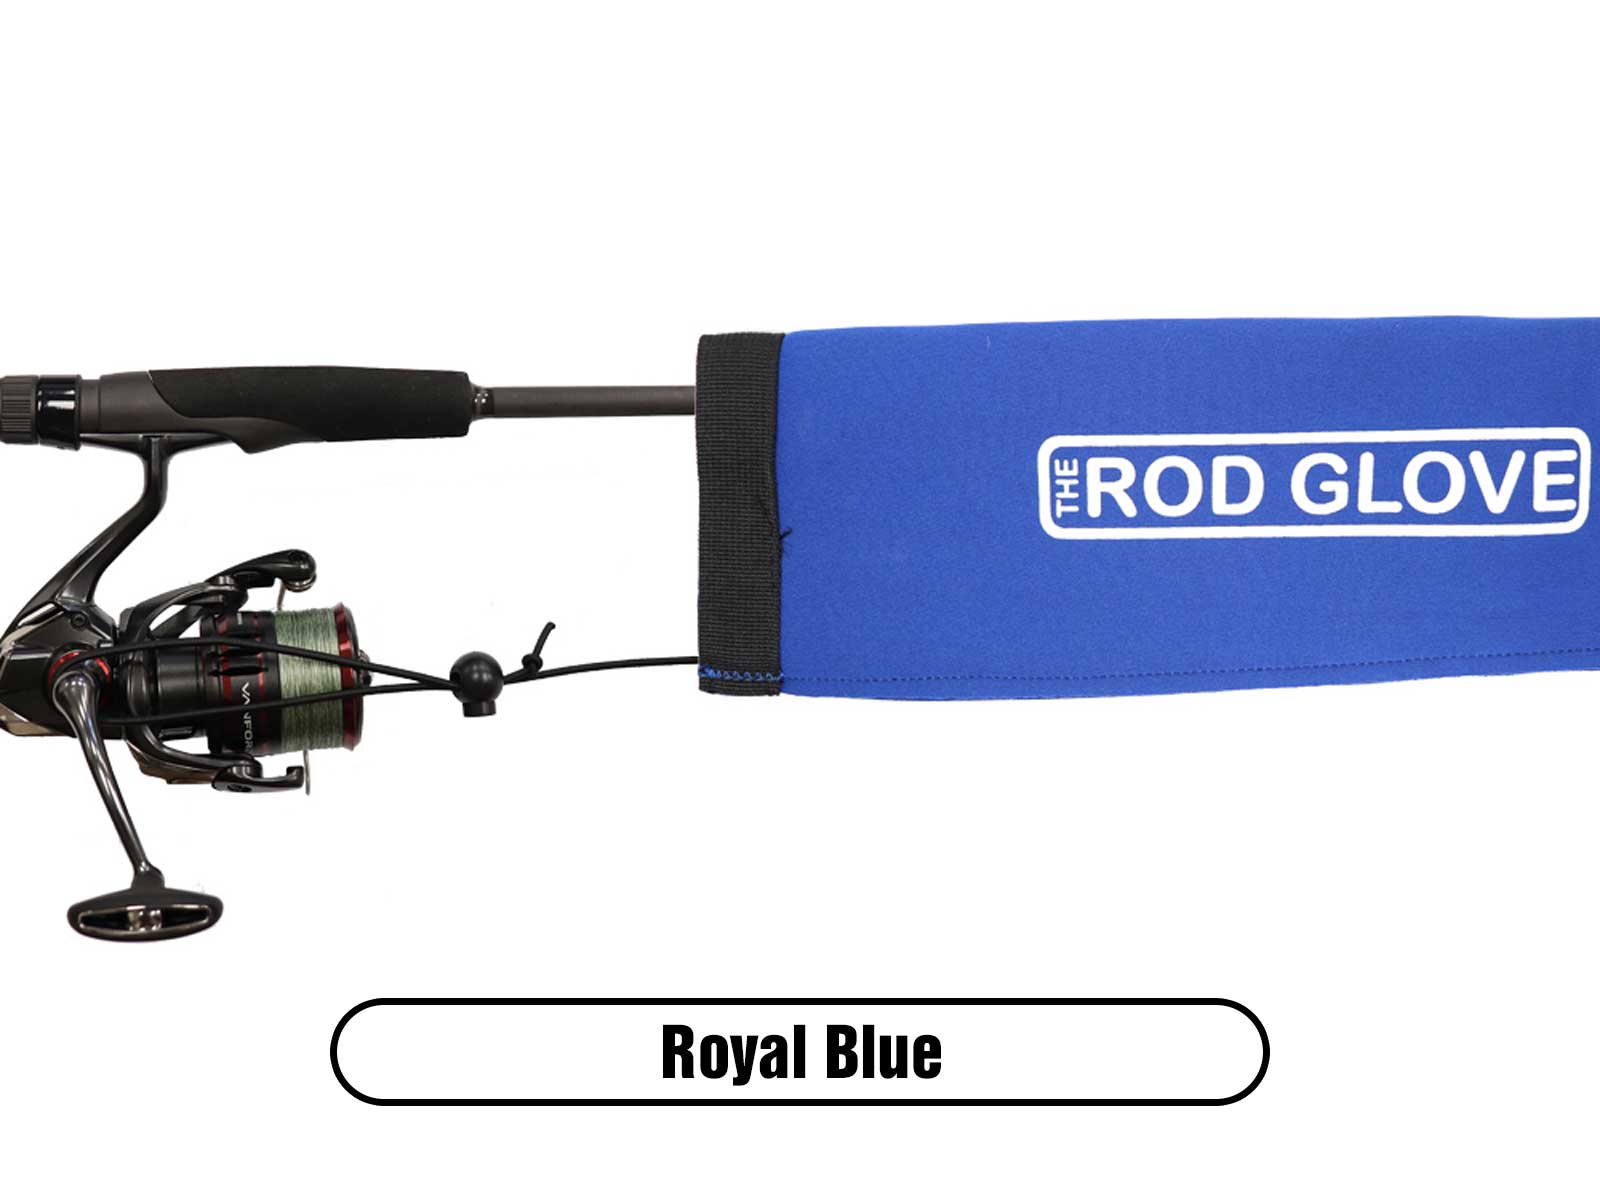  The Rod Glove Review